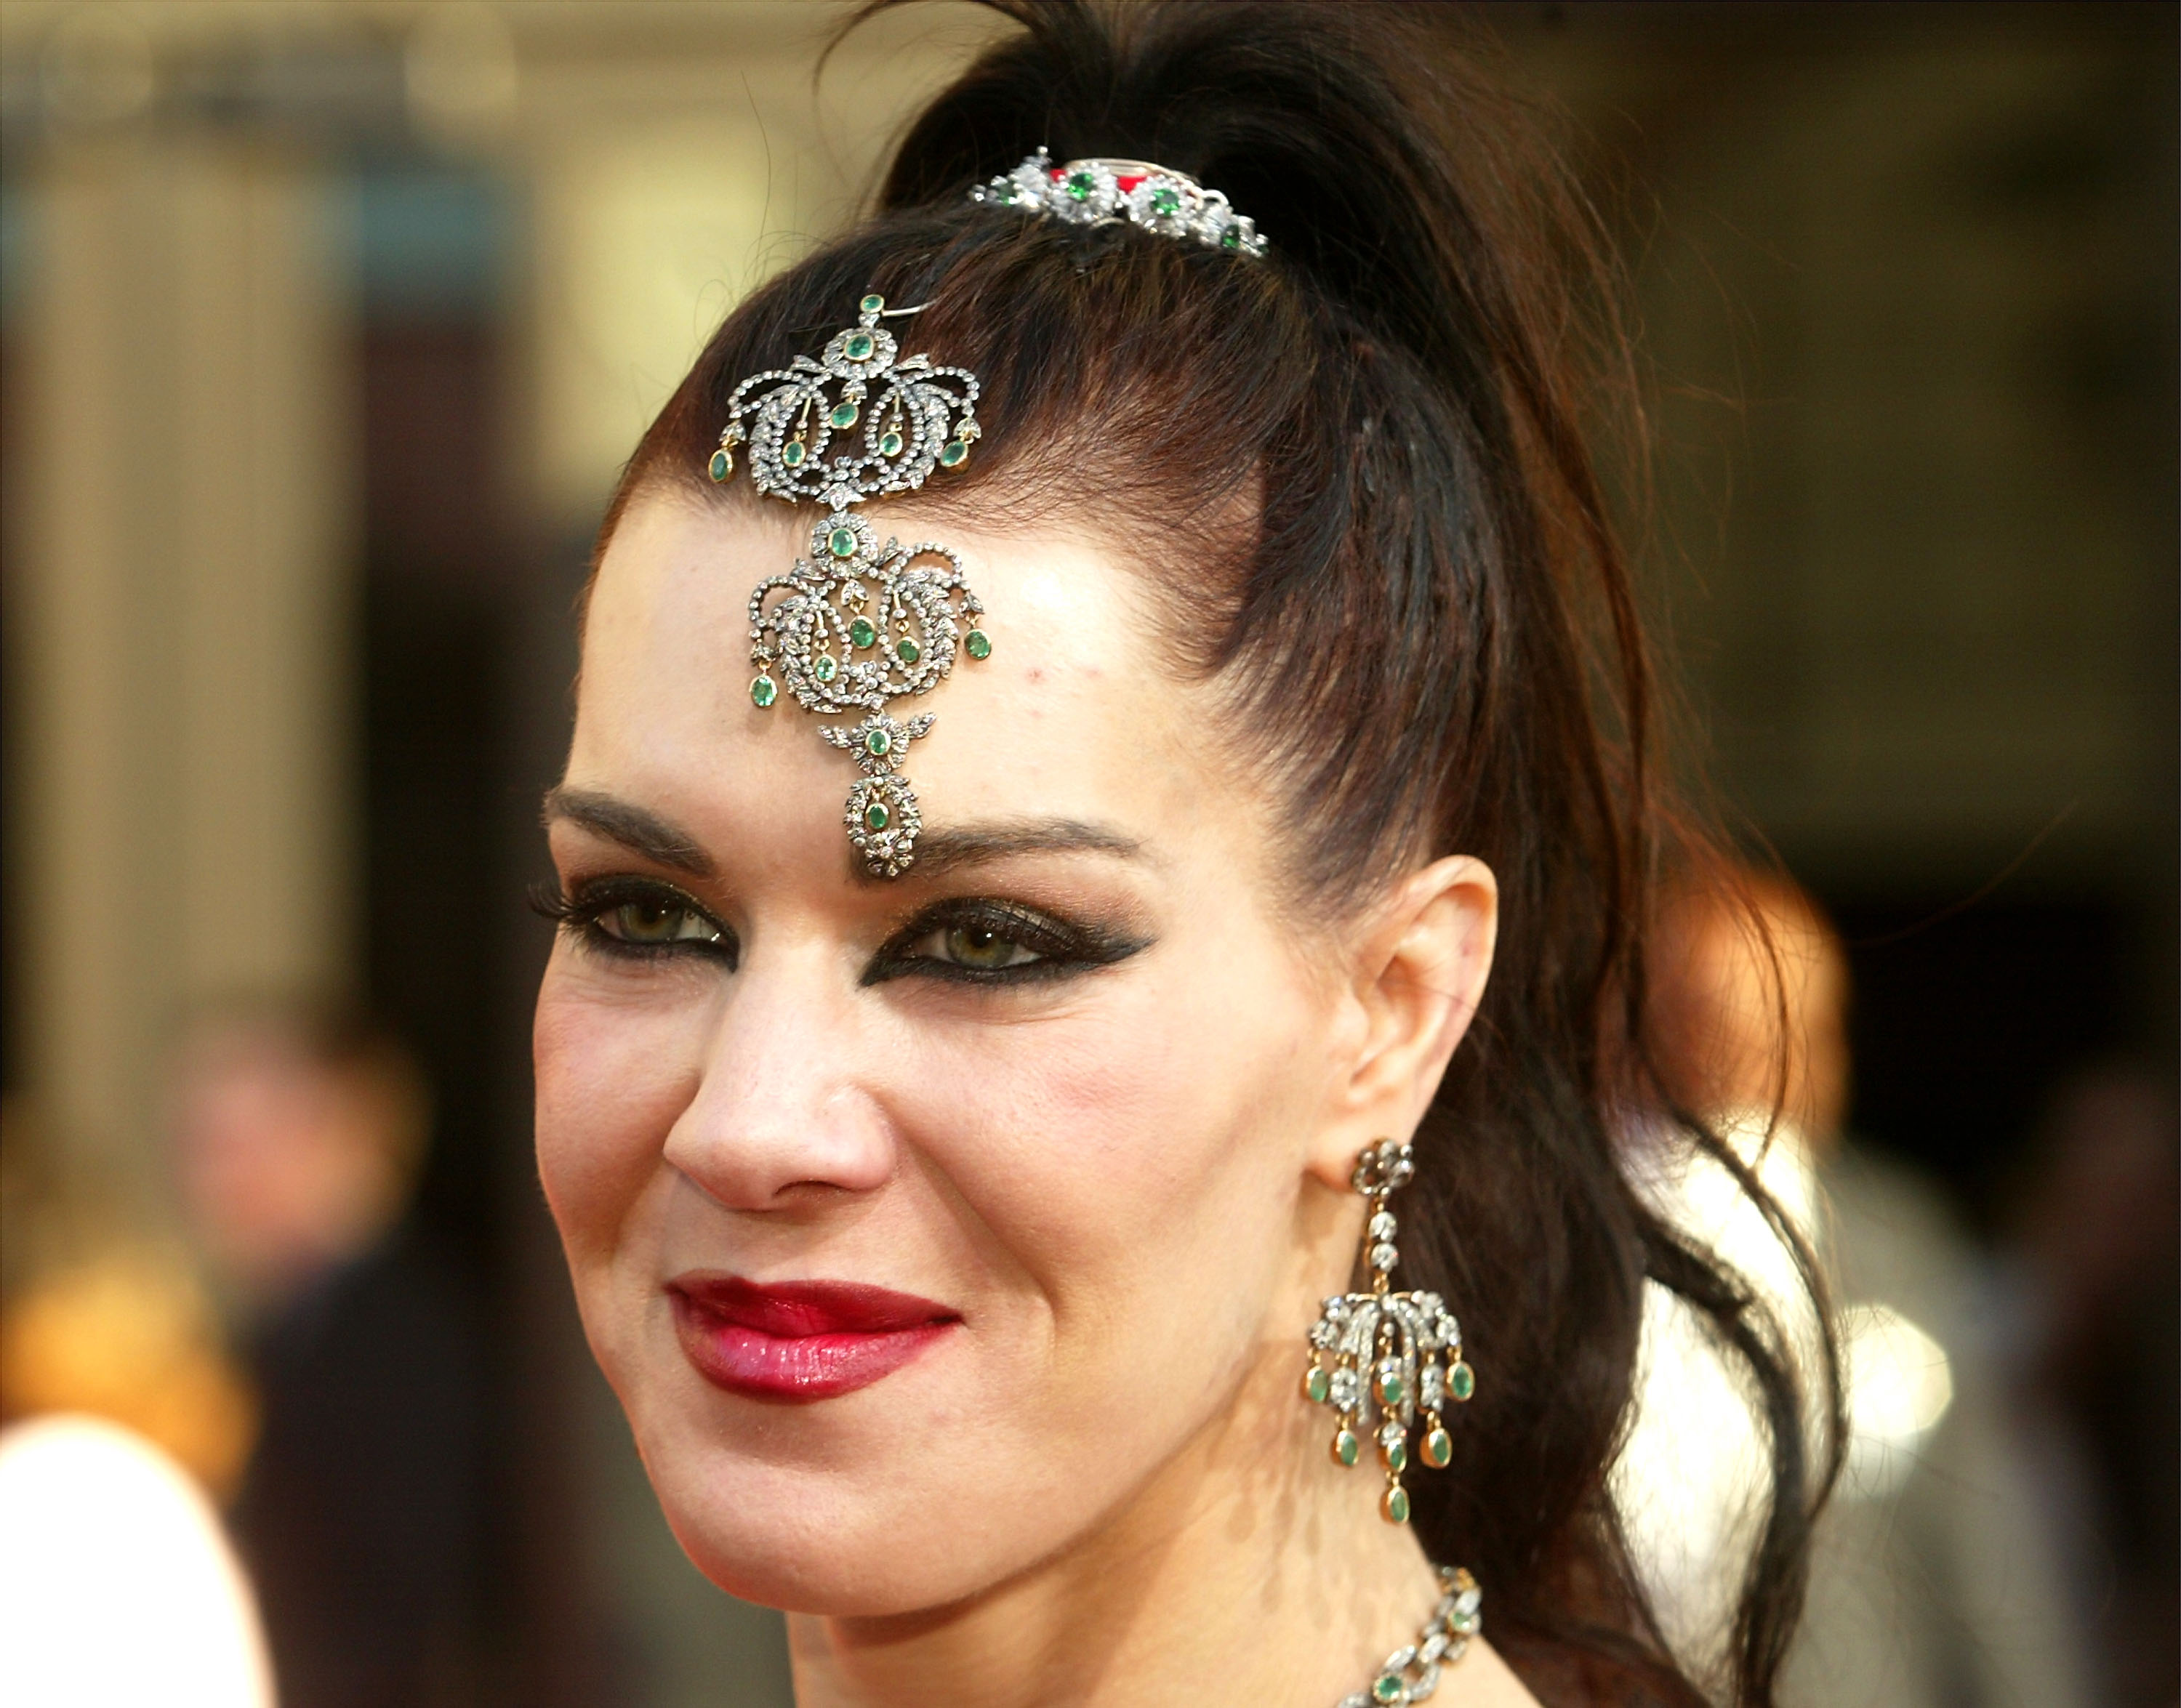 Chyna, Legendary Pro Wrestler And Entertainer, Has Died At Age 45 : The  Two-Way : NPR